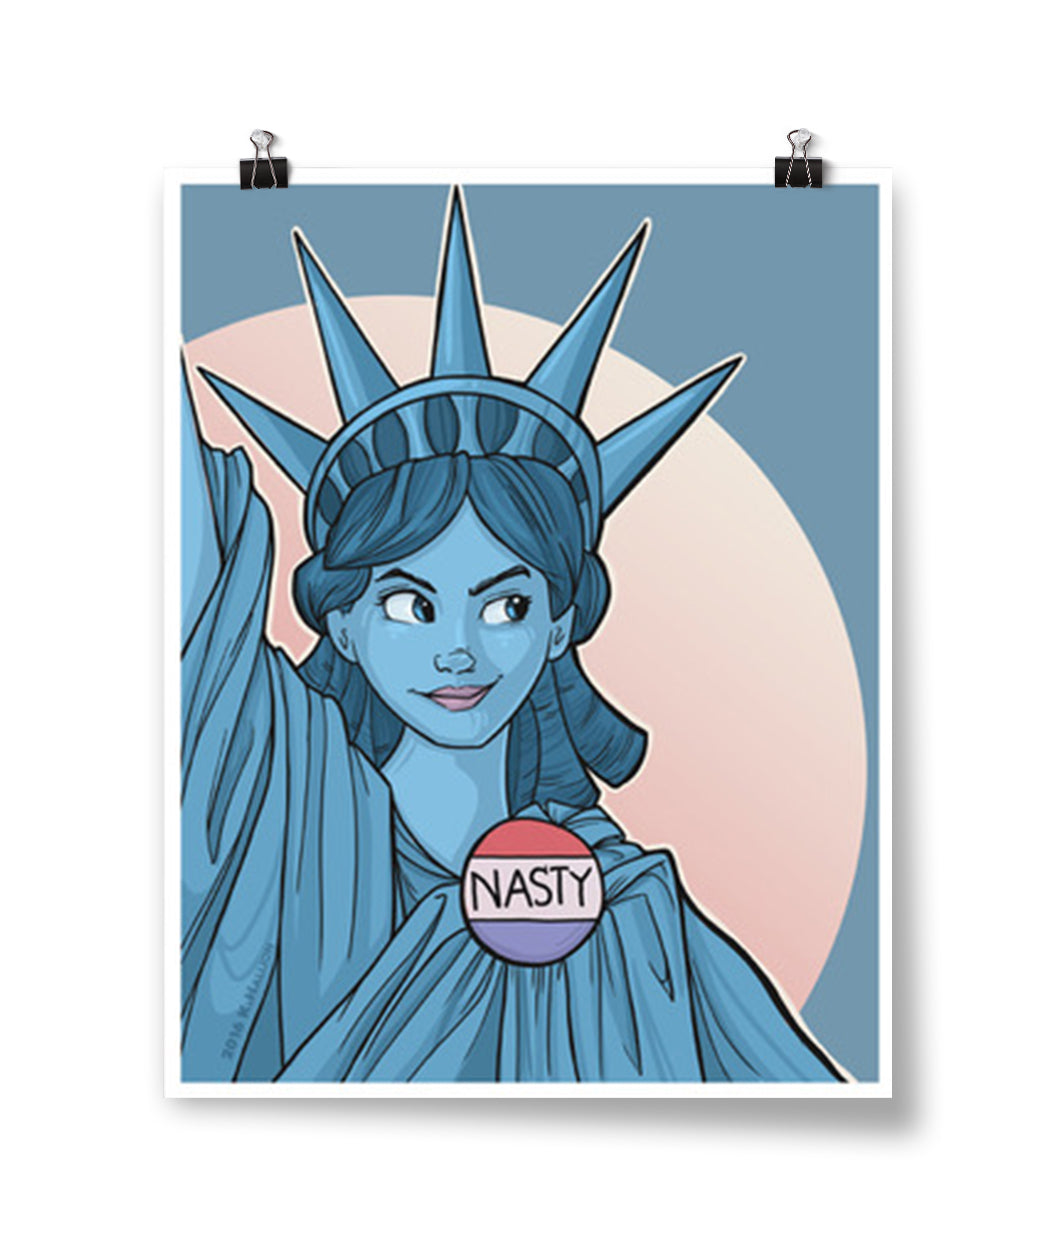 A poster showing the statue of liberty wearing a button that says "Nasty" and wearing a smirking expression. From Karen Hallion.